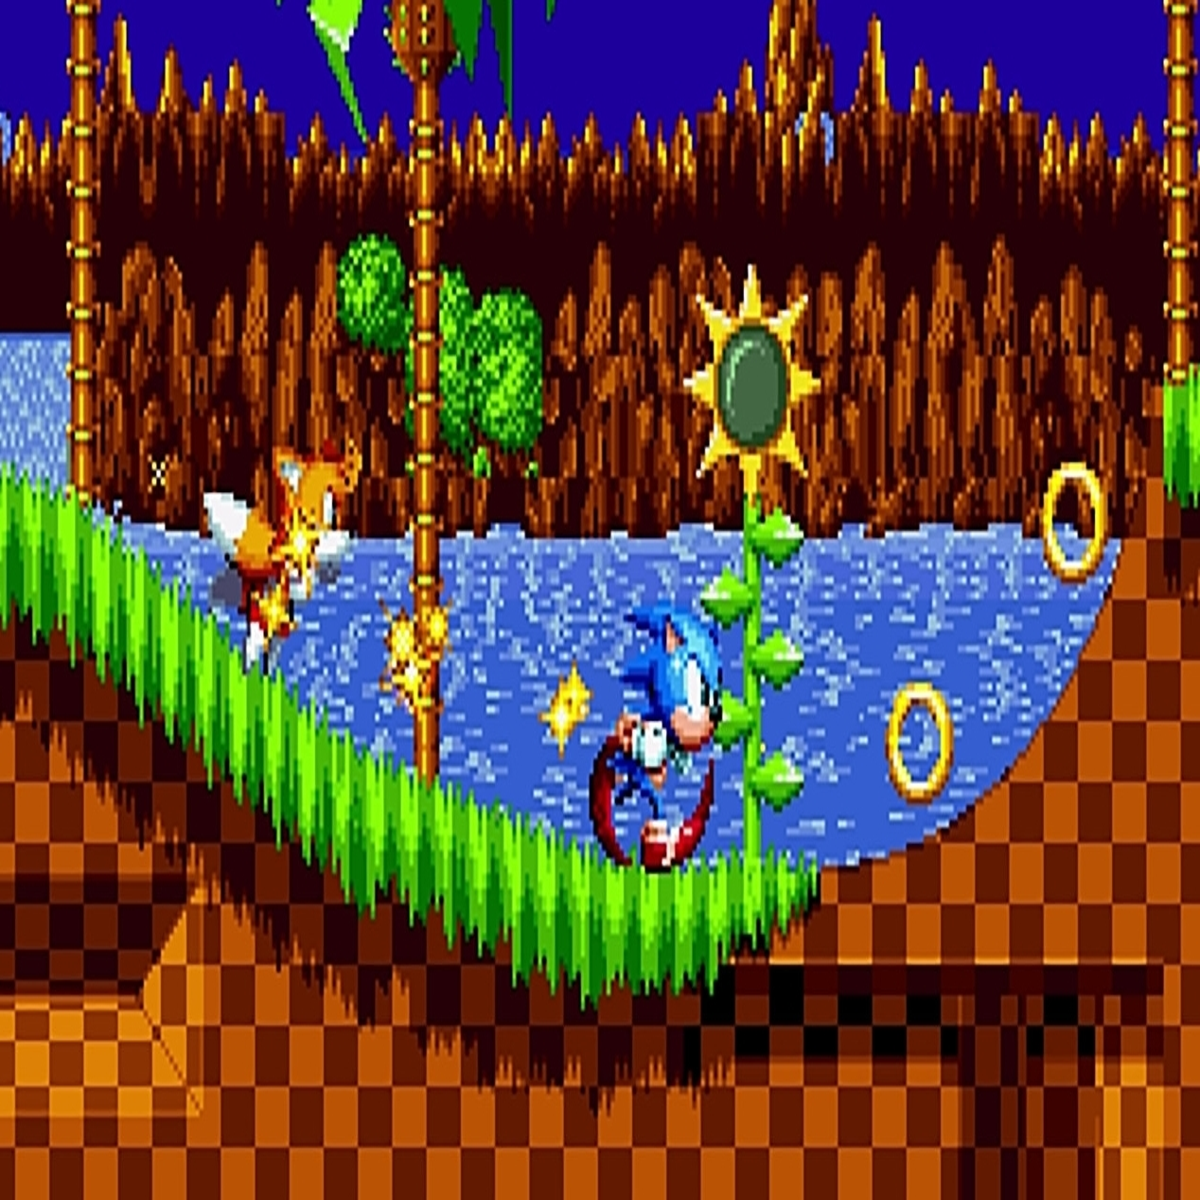 Sonic Mania  Download and Buy Today - Epic Games Store